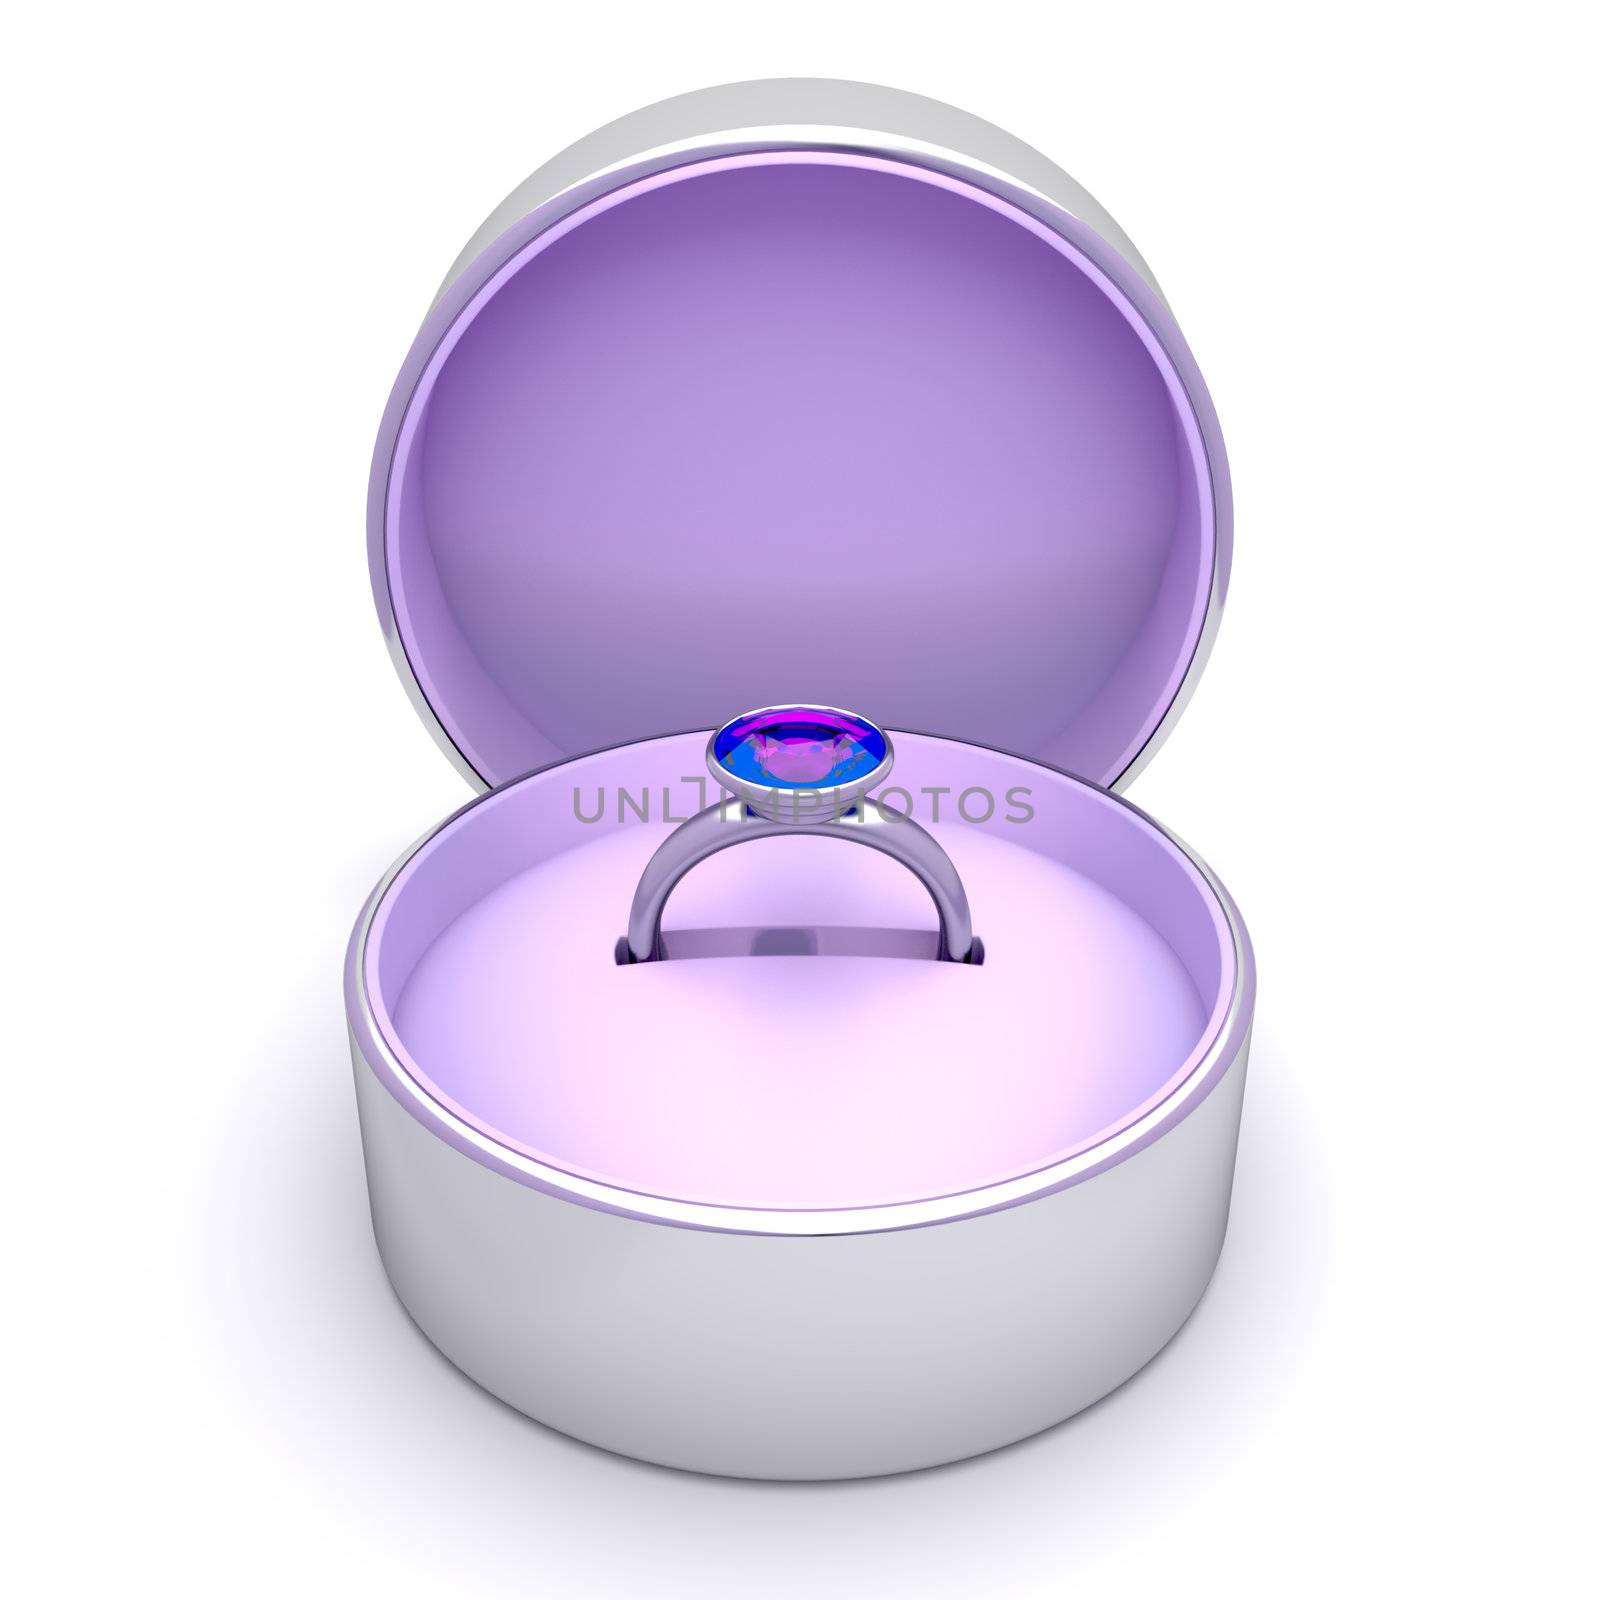 Diamond ring with box by magraphics